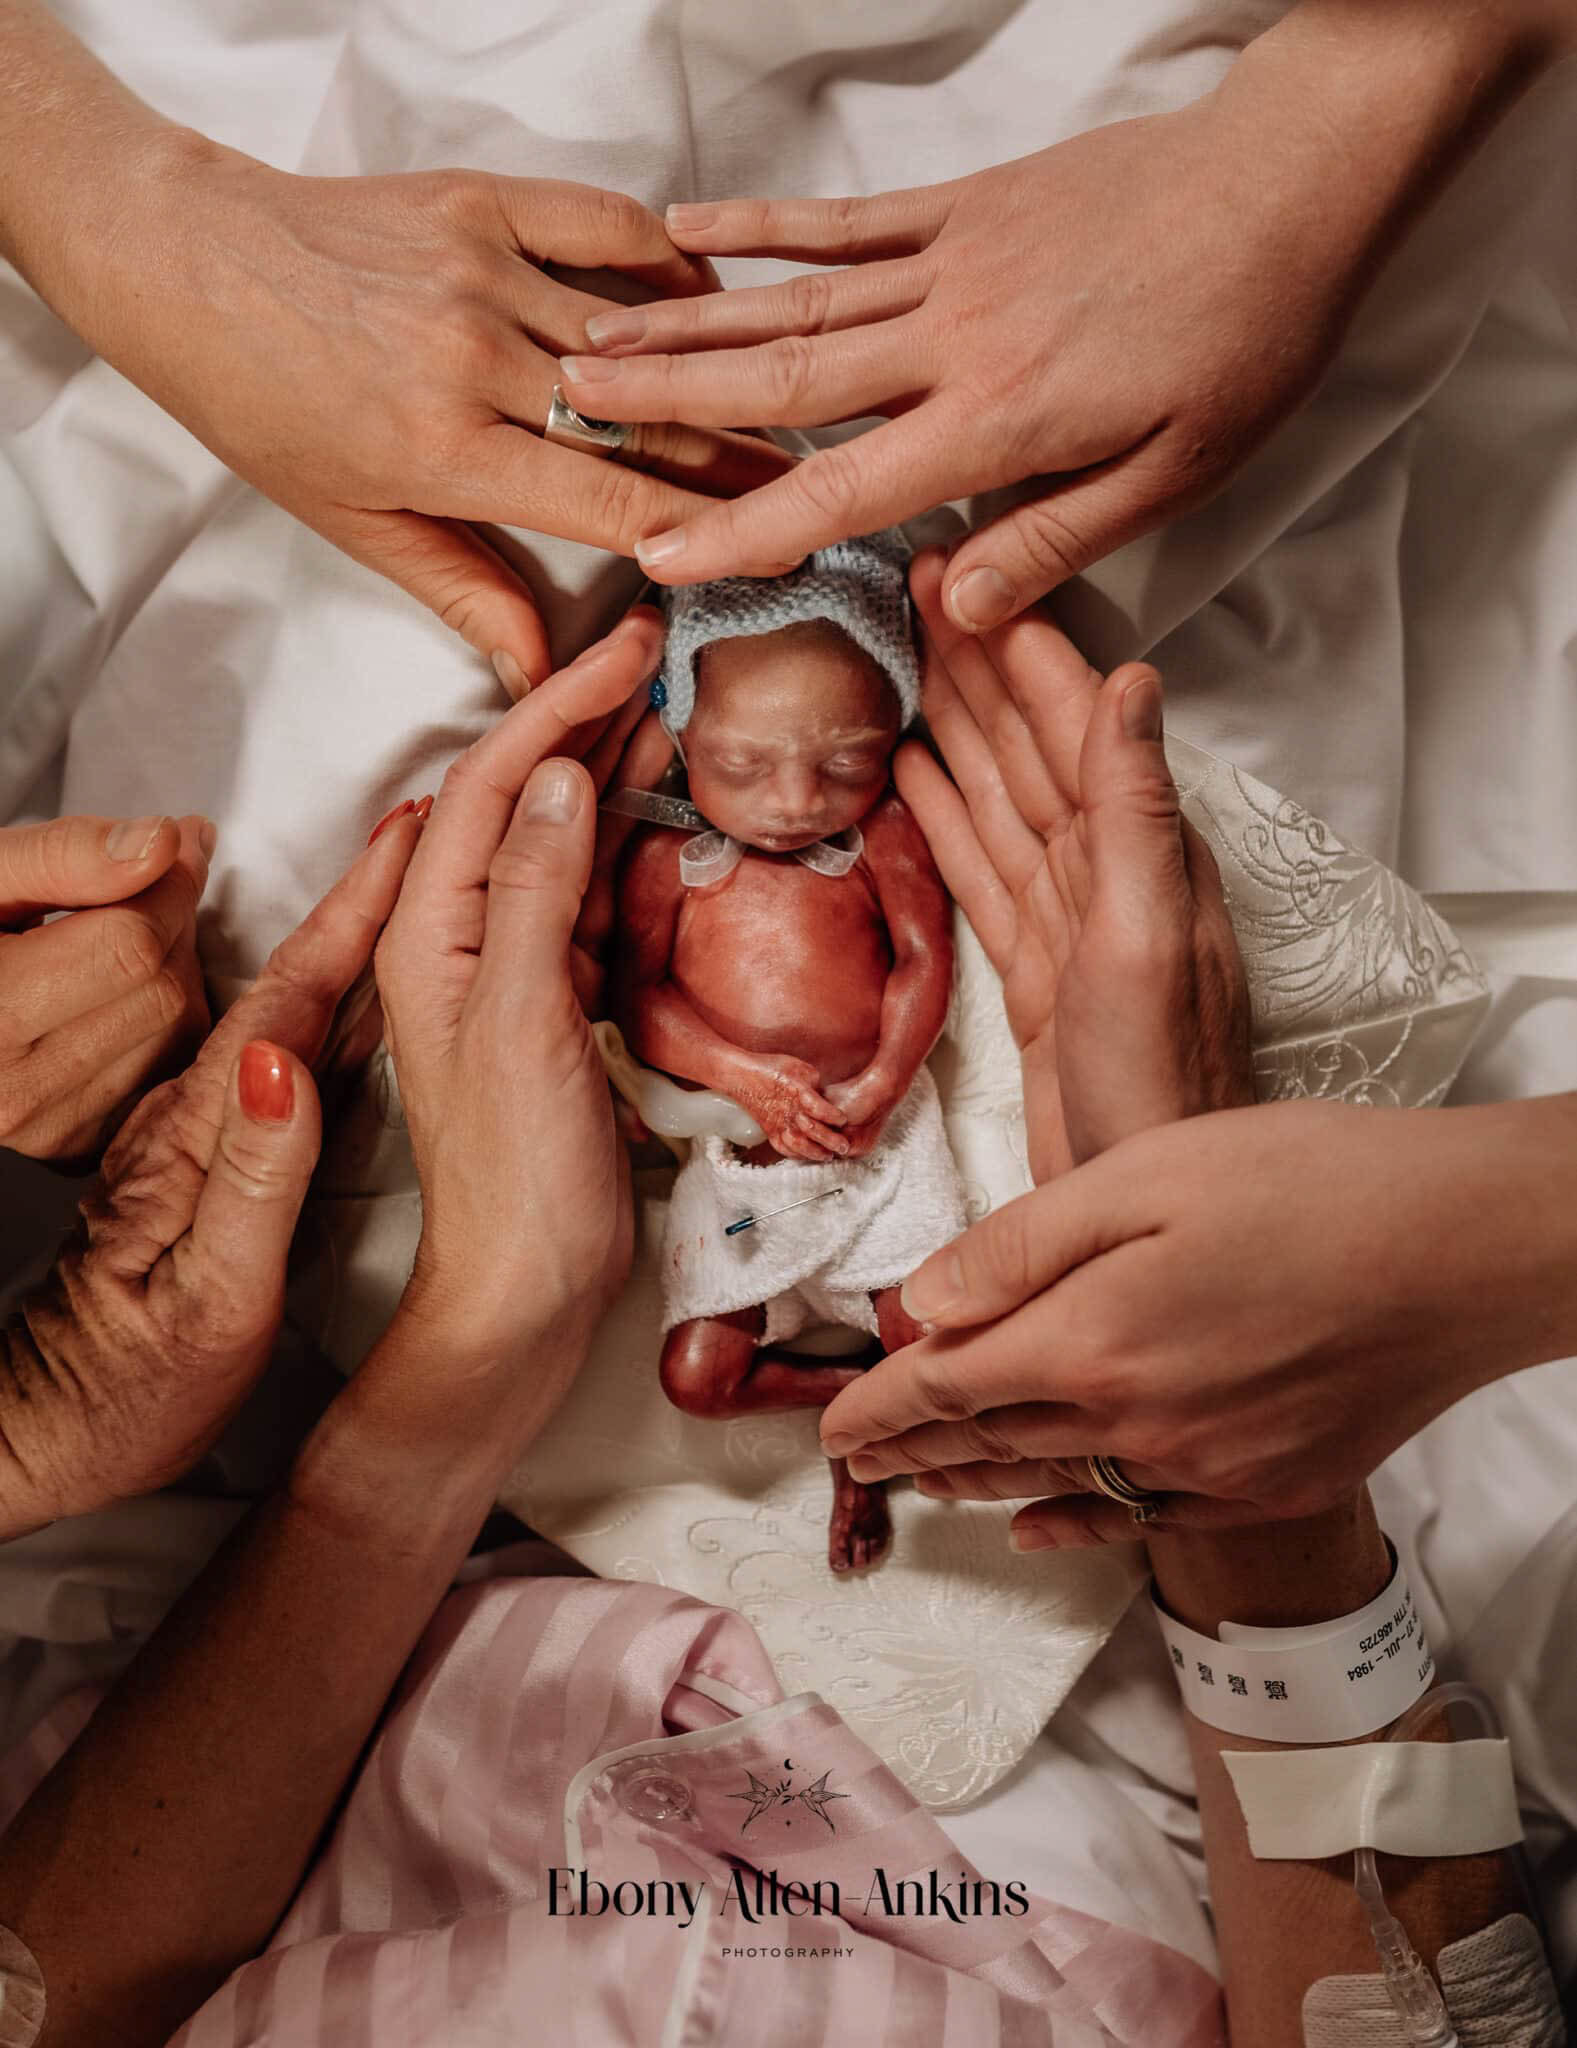 Dutch photographer Mary Fermont takes stunning photos moments after babies  are born